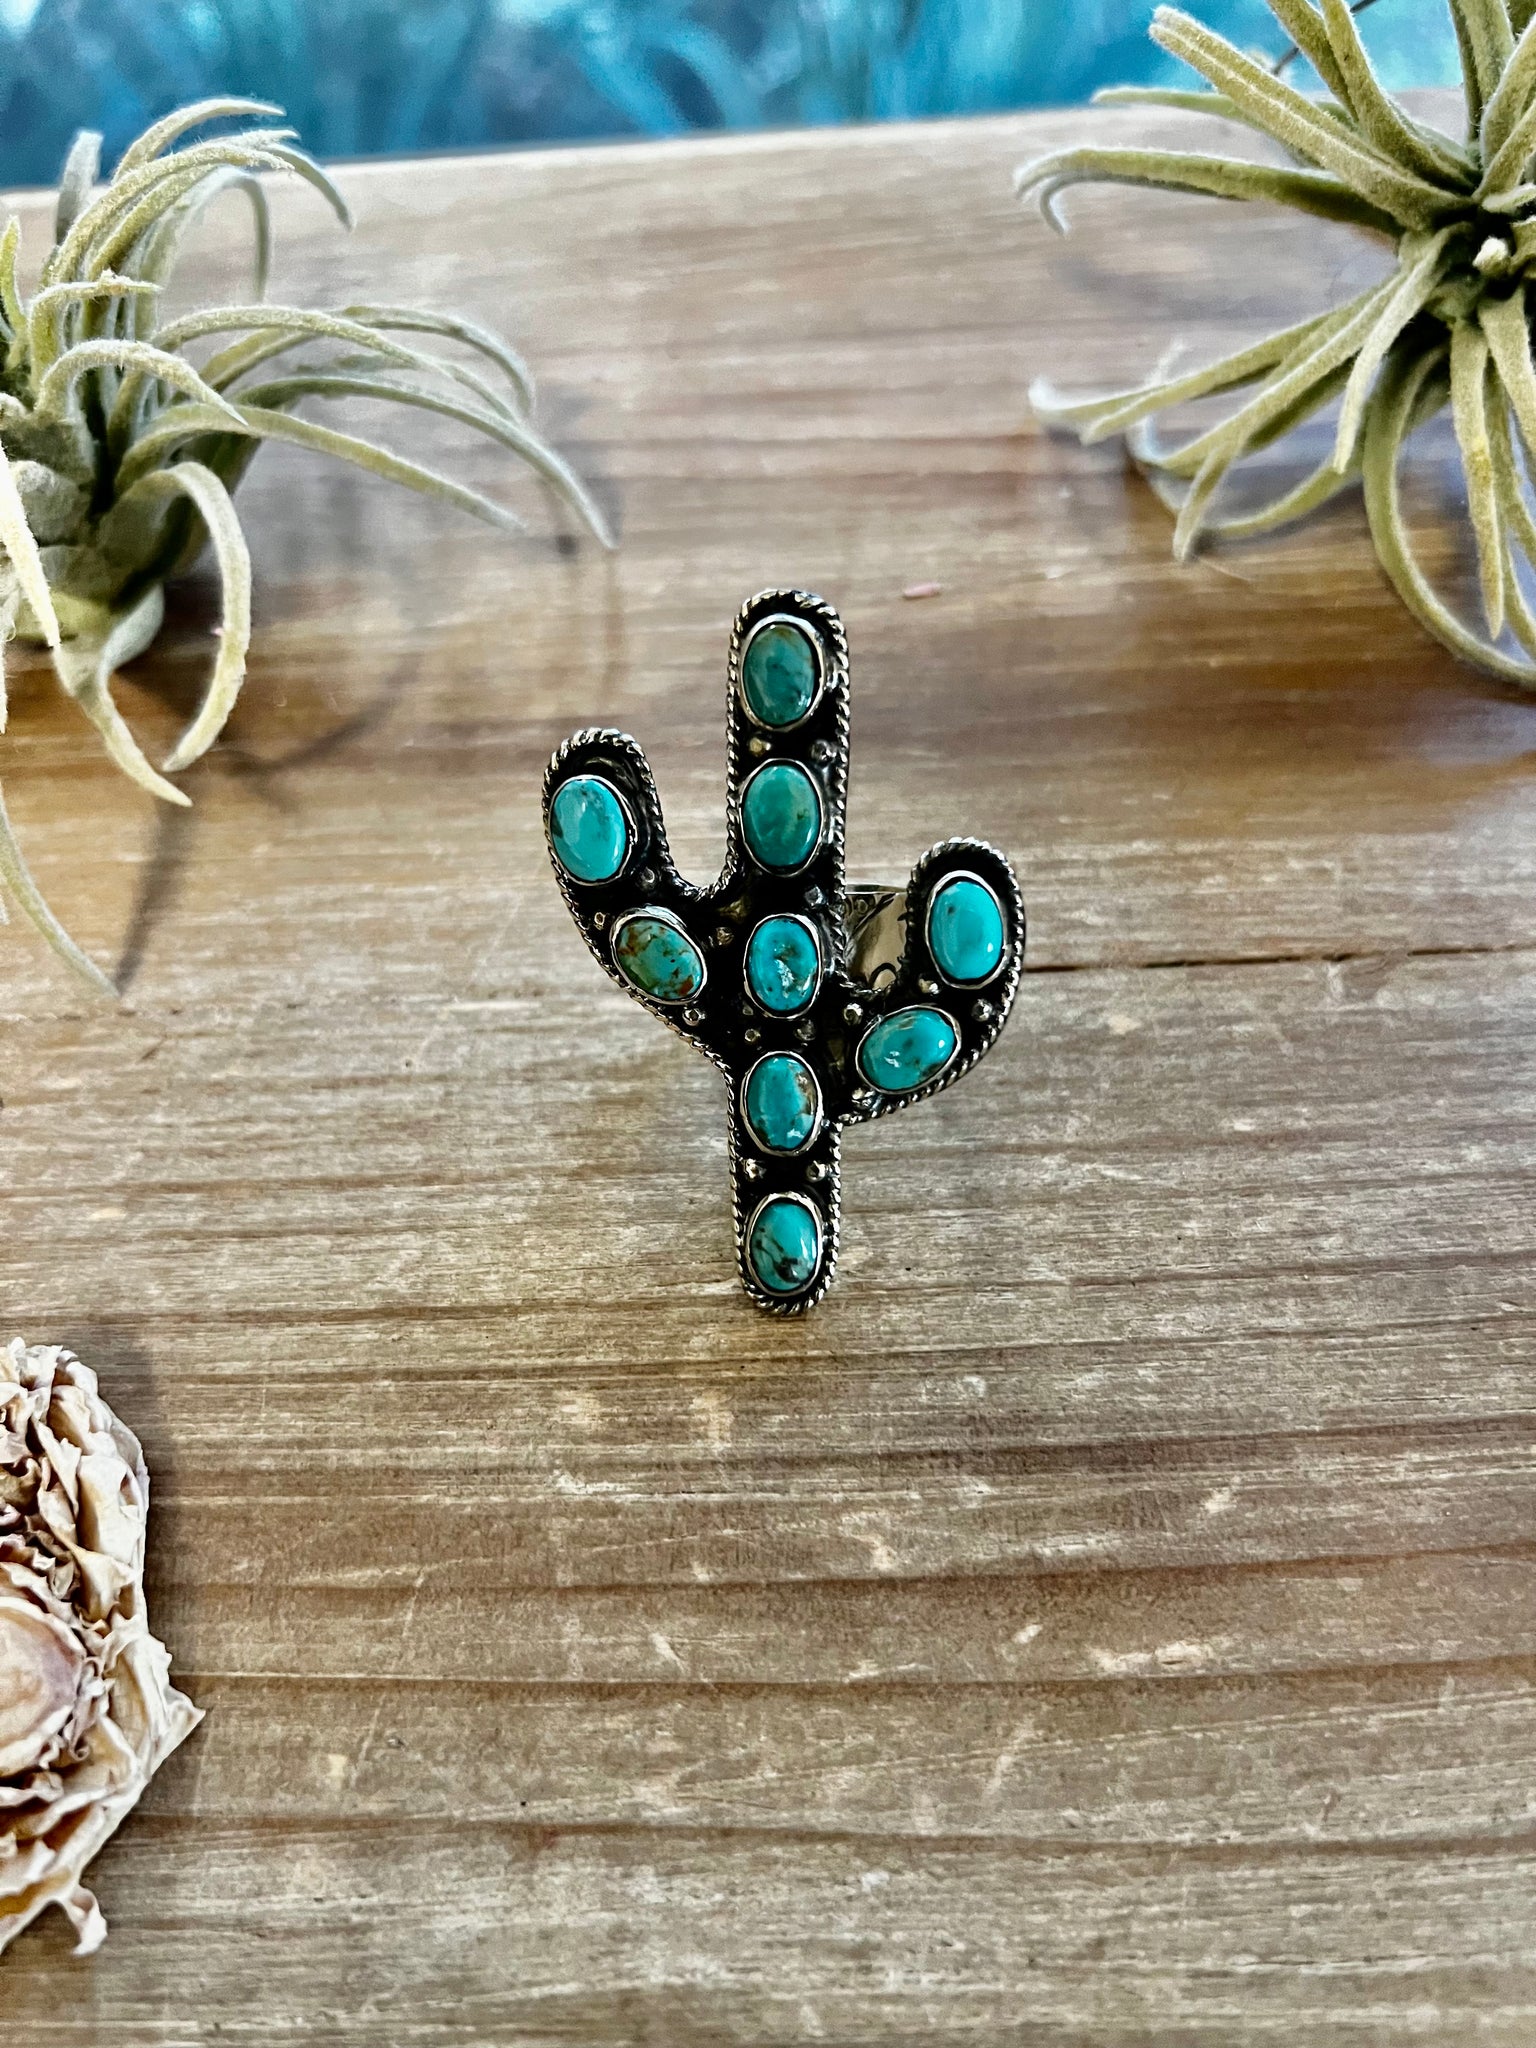 Blue cactus turquoise rings